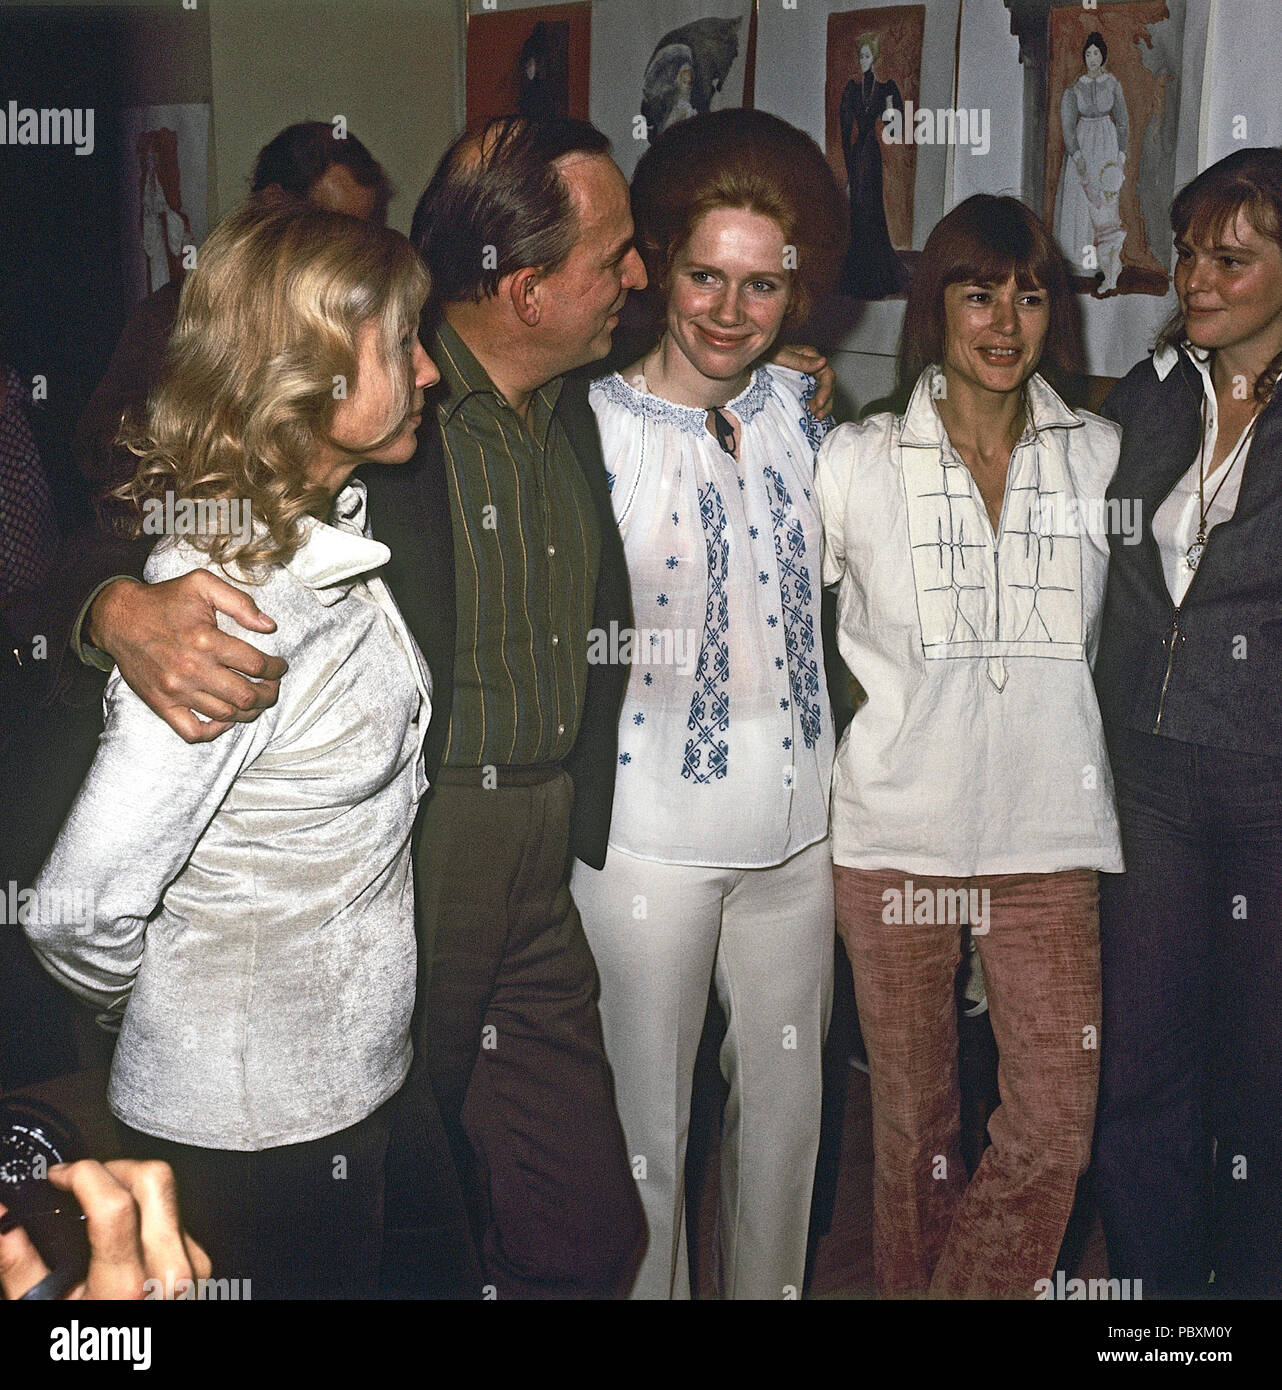 Ingmar Bergman. 1918-2007.  Swedish film director. Pictured here 1973 with the actors of his film Cries and Whispers.  Ingrid Thulin, Liv Ullmann, Harriet Andersson and Kari Sylwan. Photographer: Kristoffersson Stock Photo